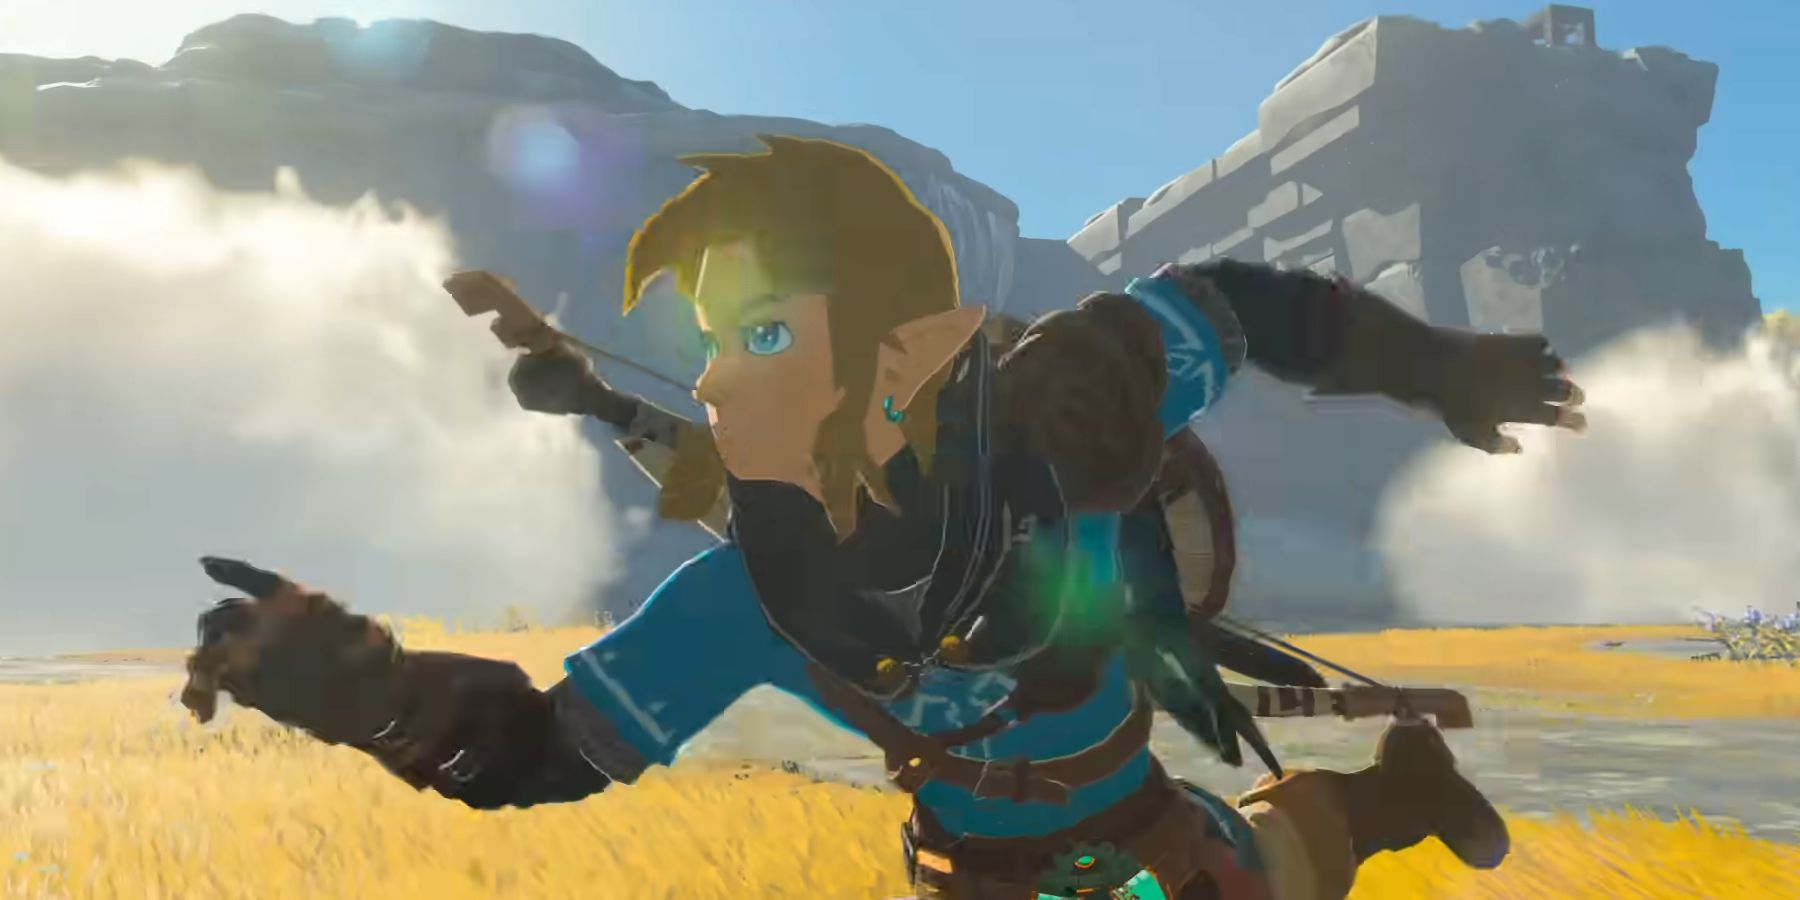 Link running from right to left, with his right hand outwards. Image source: Nintendo